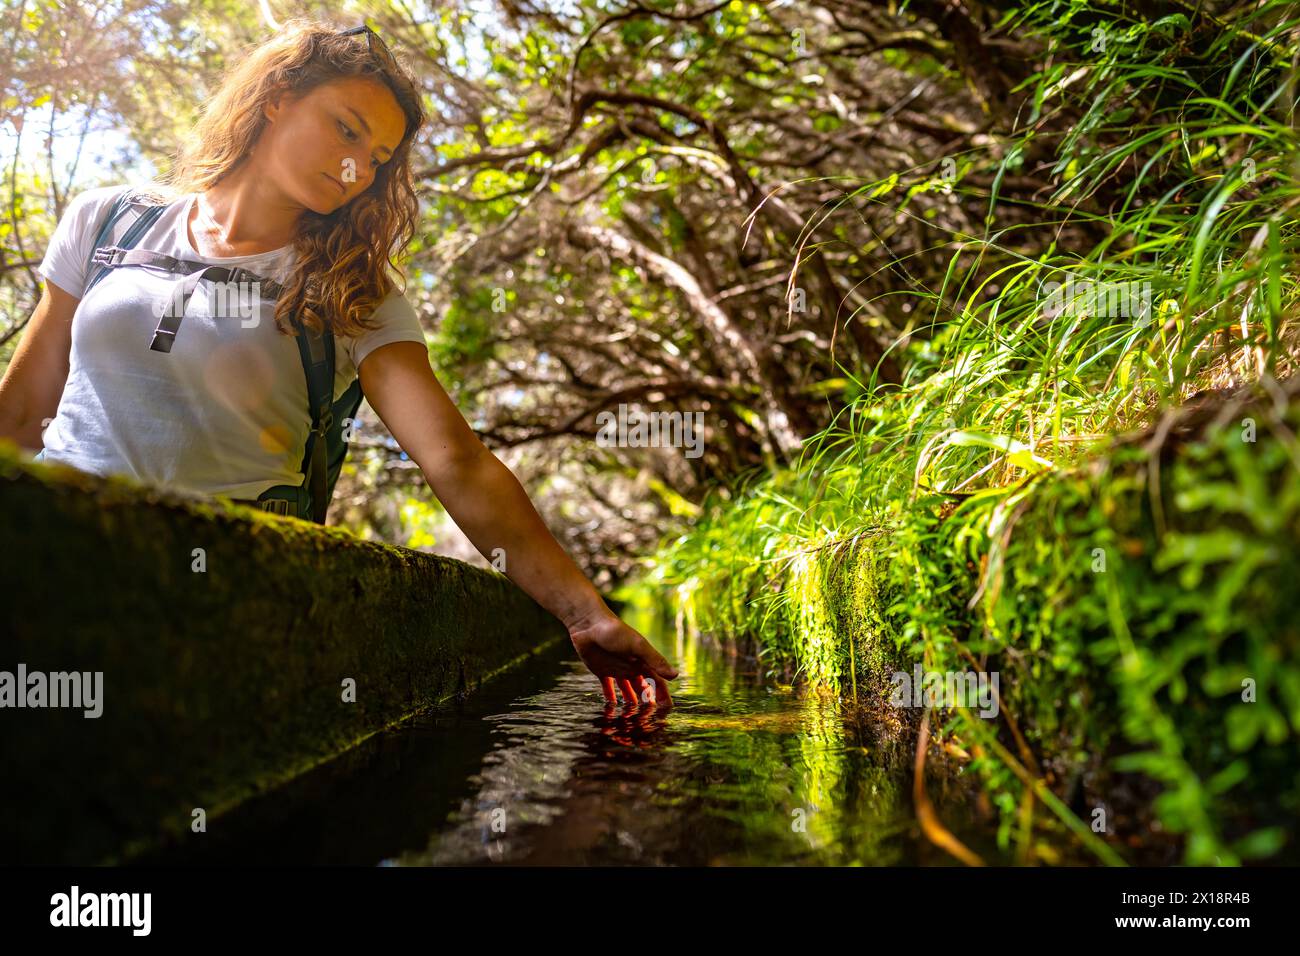 Description: Low angle shot of female tourist holding her hand in fresh water canal along green overgrown hike path. 25 Fontes waterfalls, Madeira Isl Stock Photo